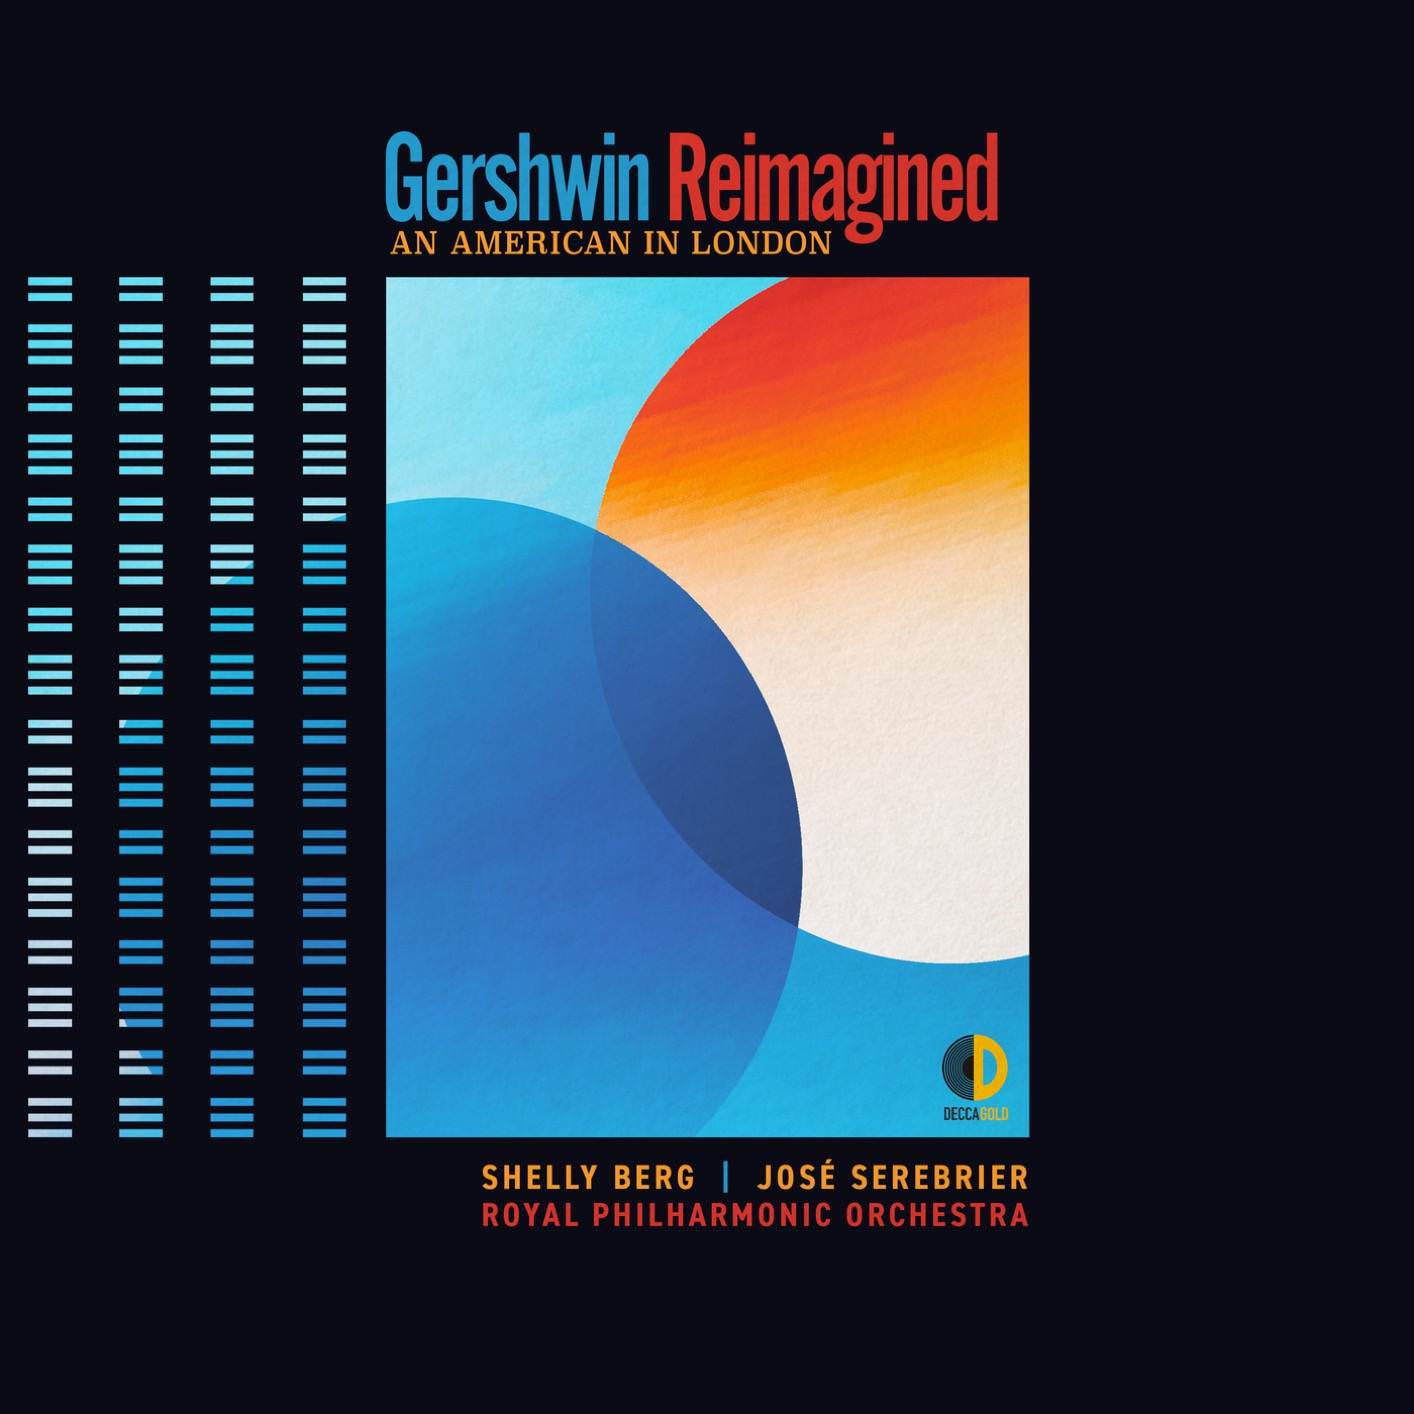 Shelly Berg, Jose Serebrier & The Royal Philharmonic Orchestra - Gershwin Reimagined: An American In London (2018) [FLAC 24bit/96kHz]